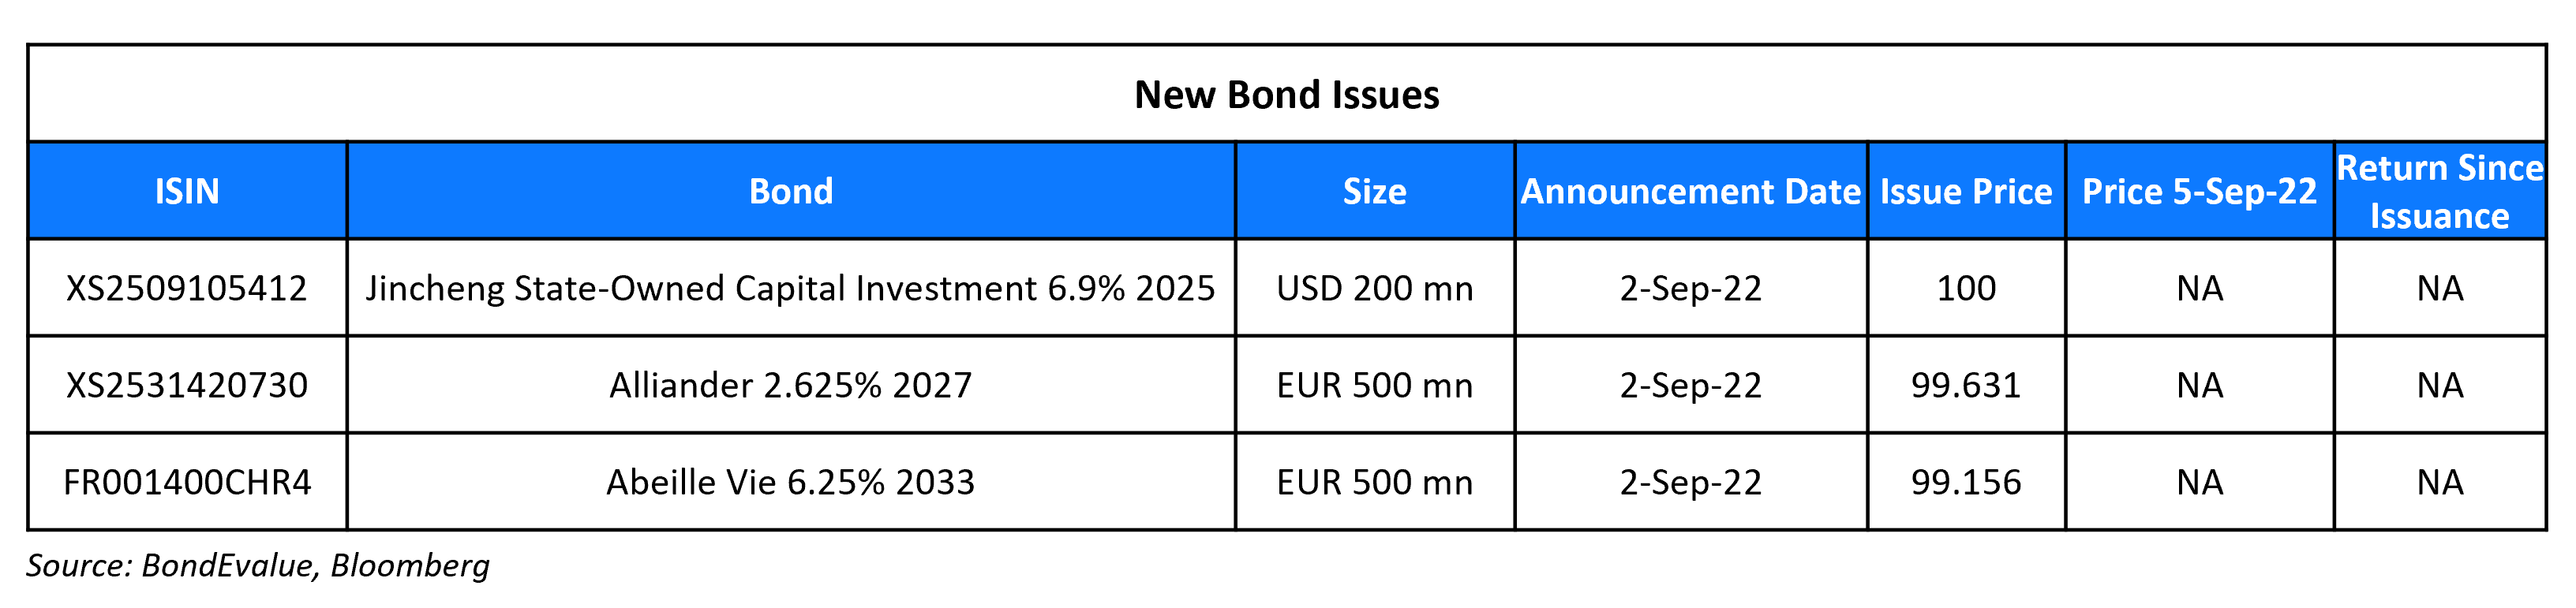 New Bond Issues 5 Sep 22